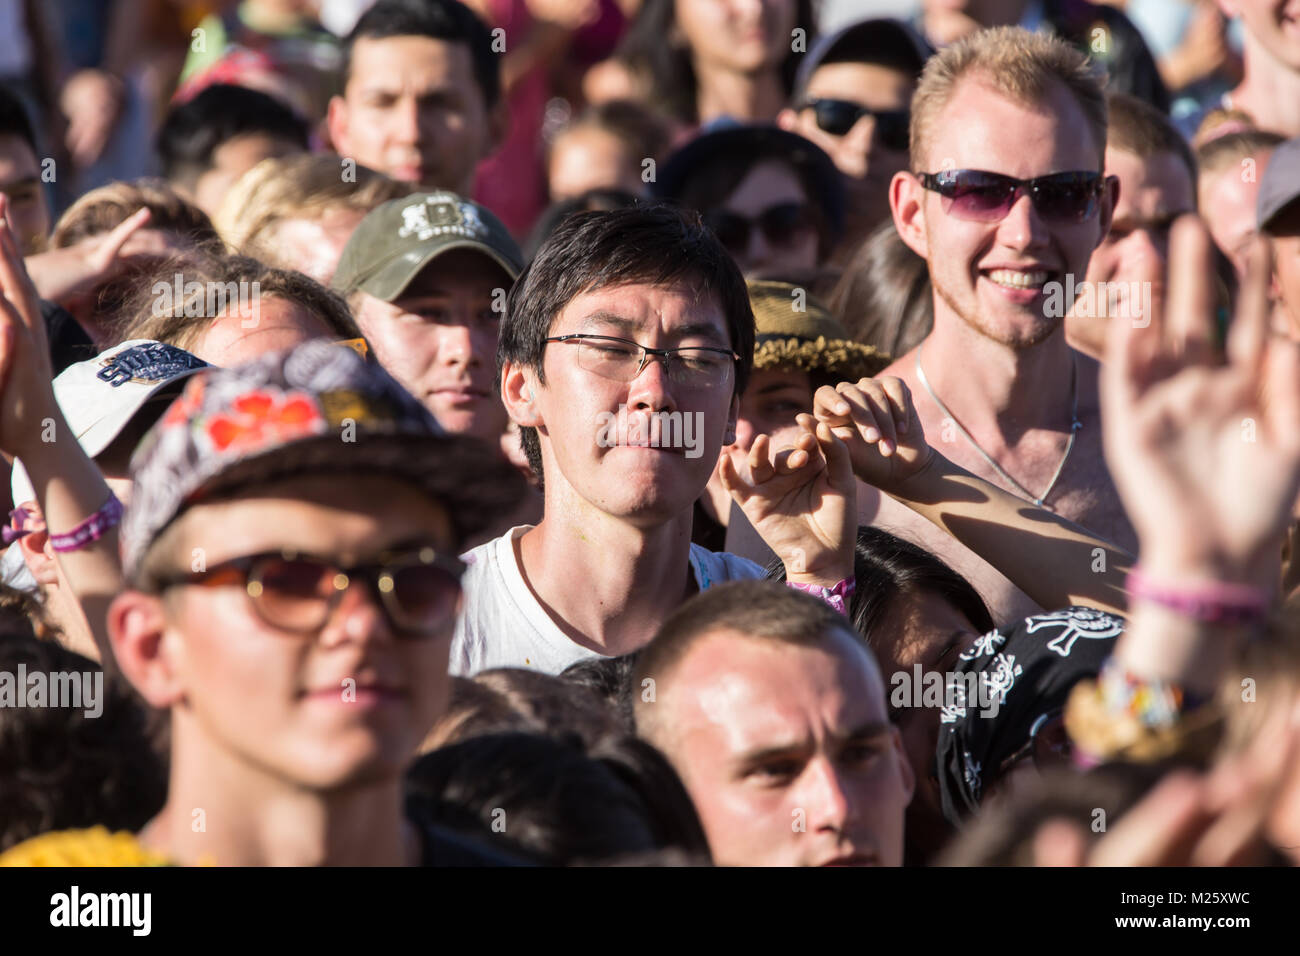 Cosmos Village, Almaty Province, Kazakhstan - 16 August 2015: The festival of ethnic music Forey, a lot of people gathers on this holiday to relax and have  fun. Ethnic open-air concert, where many people gathered. Crowd of blurred people Stock Photo